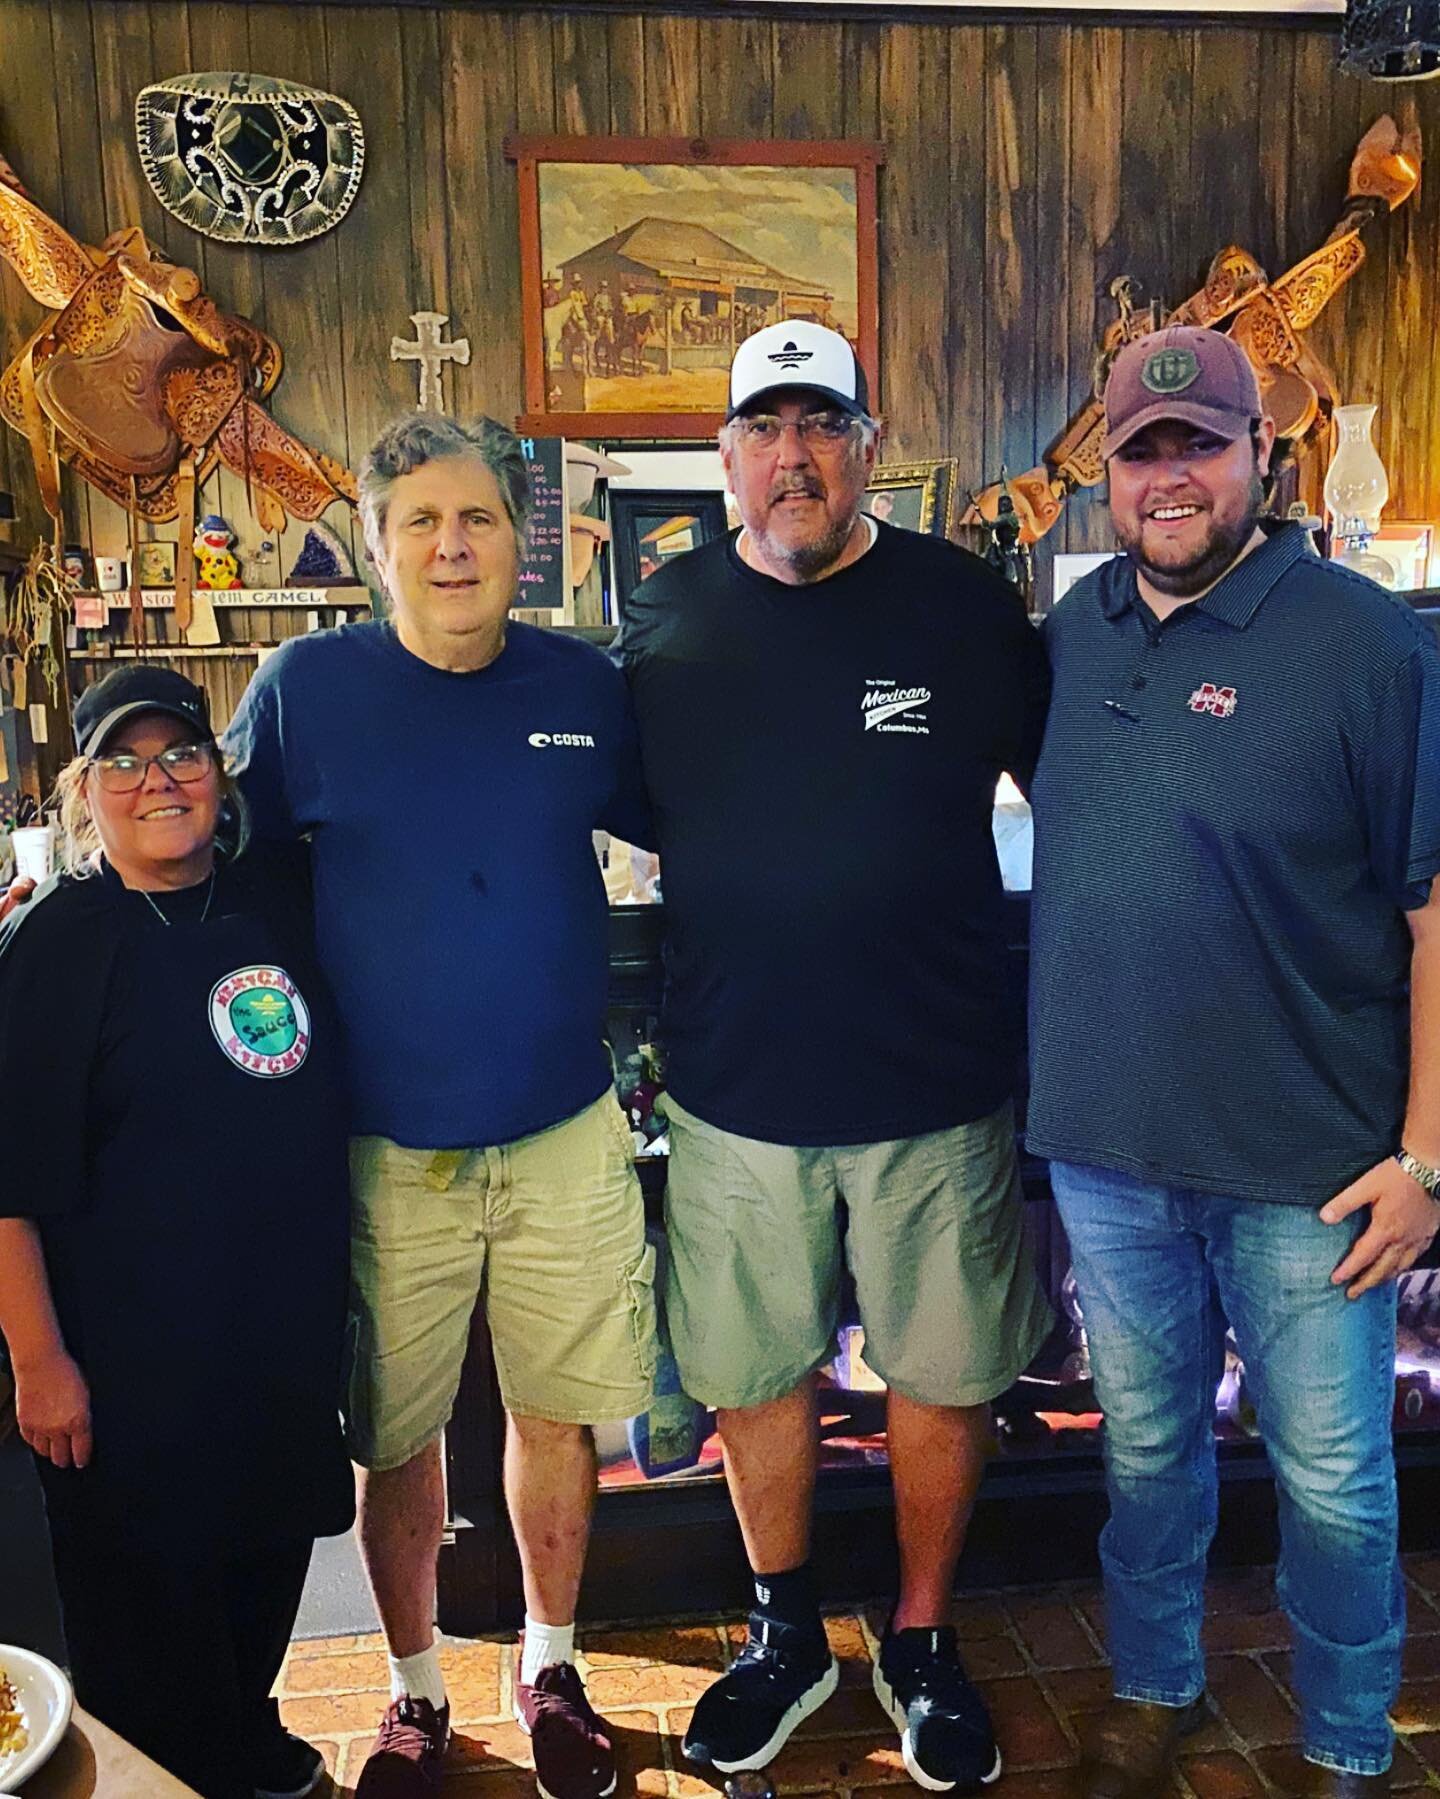 We were saddened to hear of the passing of Mississippi State football coach Mike Leach this morning. It was such an honor and privilege to have him dine with us. He was so kind to all of our customers and staff and he truly made the world a better pl